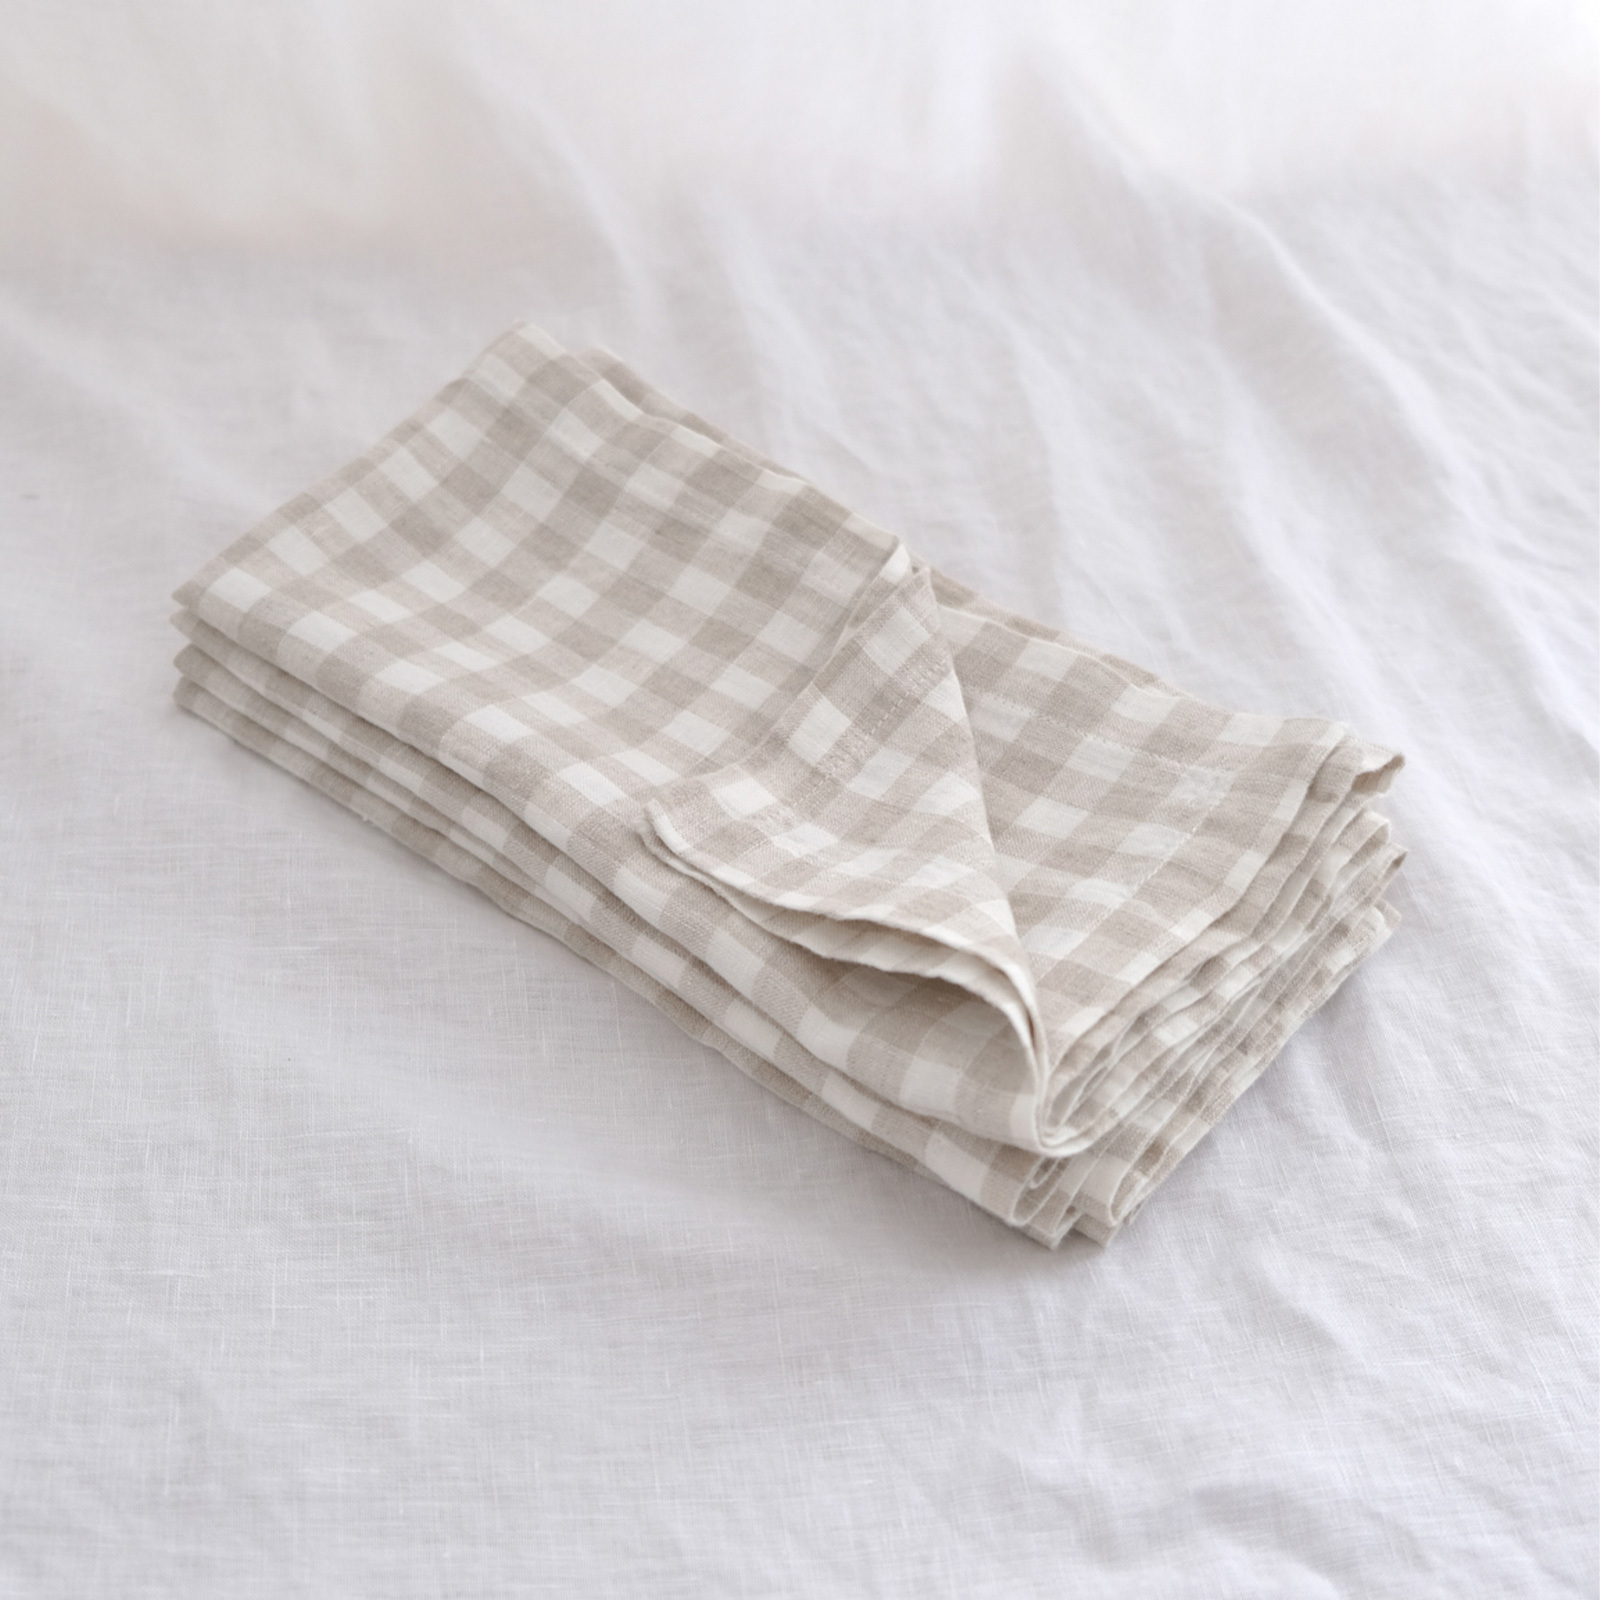 Pure French linen Napkins in Beige Gingham (set of 4)